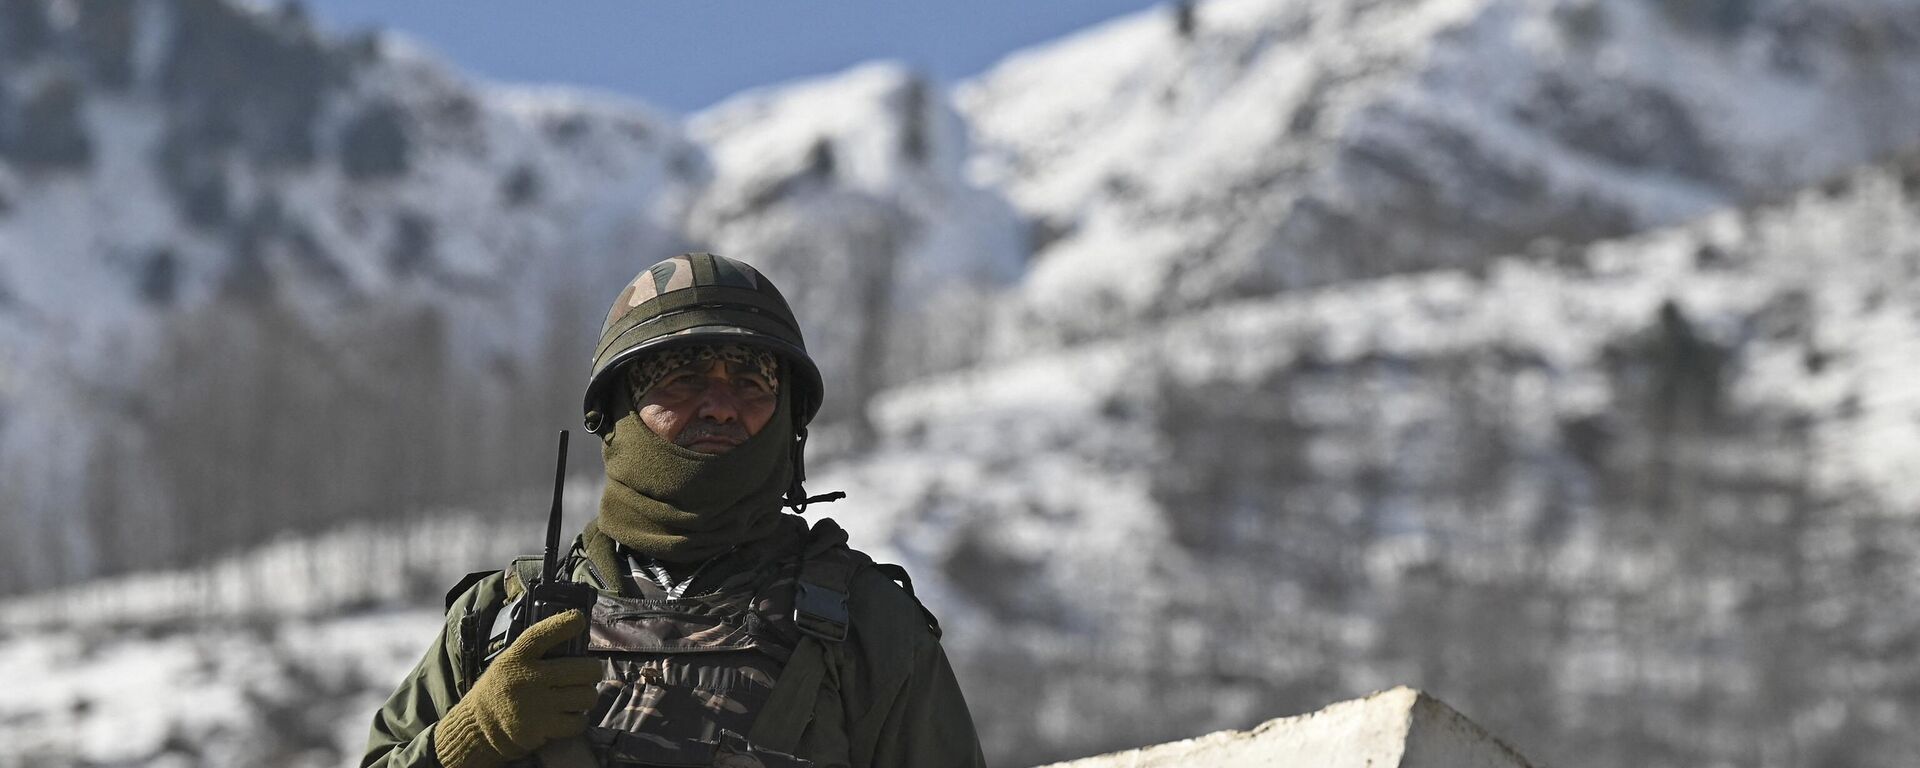 An Indian security personnel stands guard as Indian Congress leader Rahul Gandhi and former Chief Minister of Jammu and Kashmir Omar Abdullah (not pictured) walk during the 'Bharat Jodo Yatra' march in Banihal, some 94 Km from Srinagar in Kashmir, on January 27, 2023. - Sputnik India, 1920, 27.01.2023